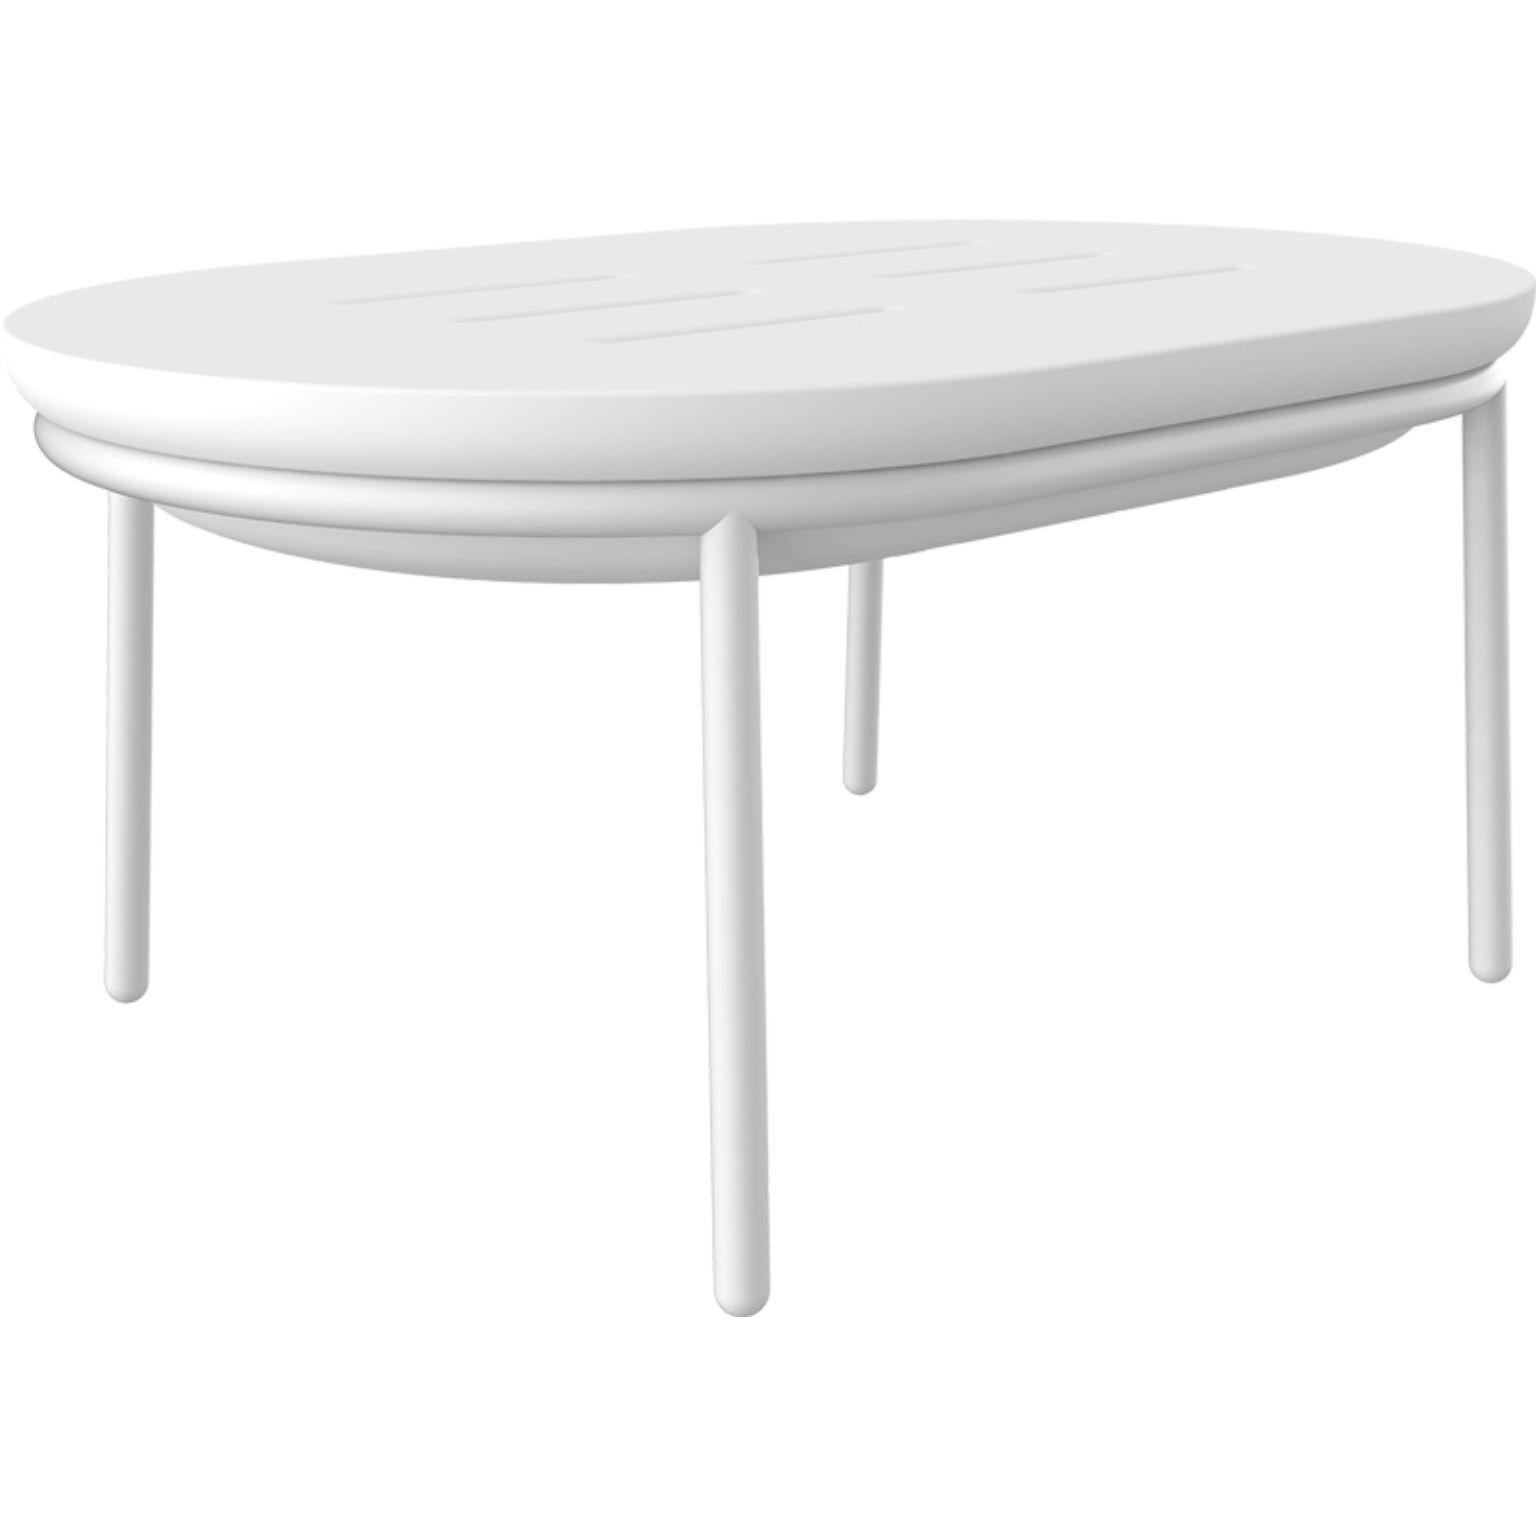 Lace white 90 low table by MOWEE
Dimensions: D60 x W90 x H41 cm
Material: Polyethylene and stainless steel.
Weight: 9.2 kg
Also available in different colors and finishes (lacquered).

Lace is a collection of furniture made by rotomoulding.